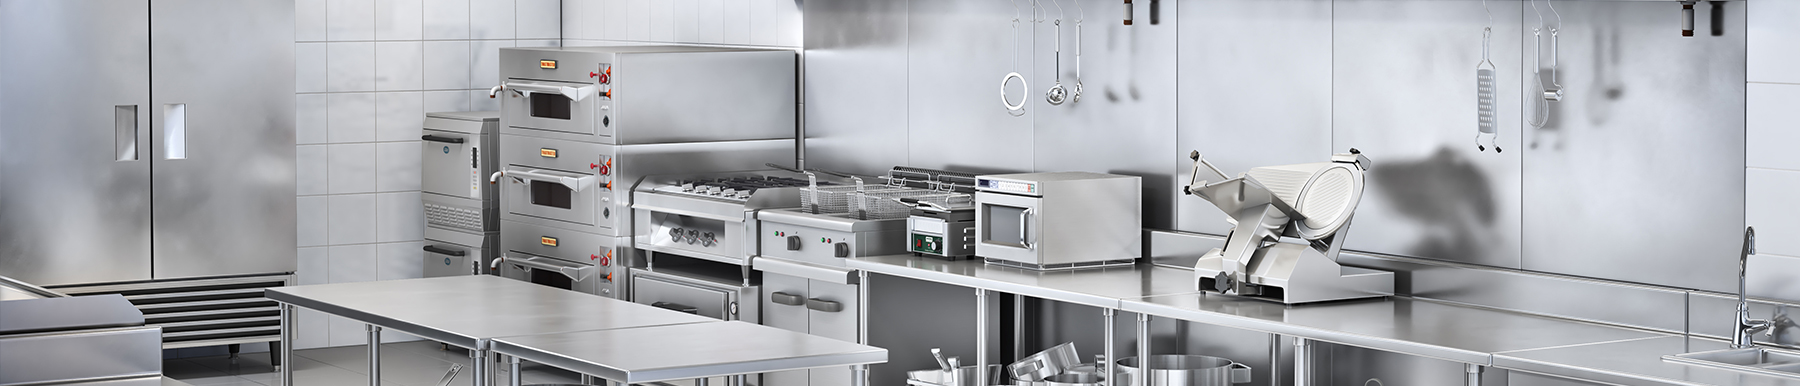 Catering Equipment Suppliers Near East Riding | H2 Catering Equipment Catering Equipment